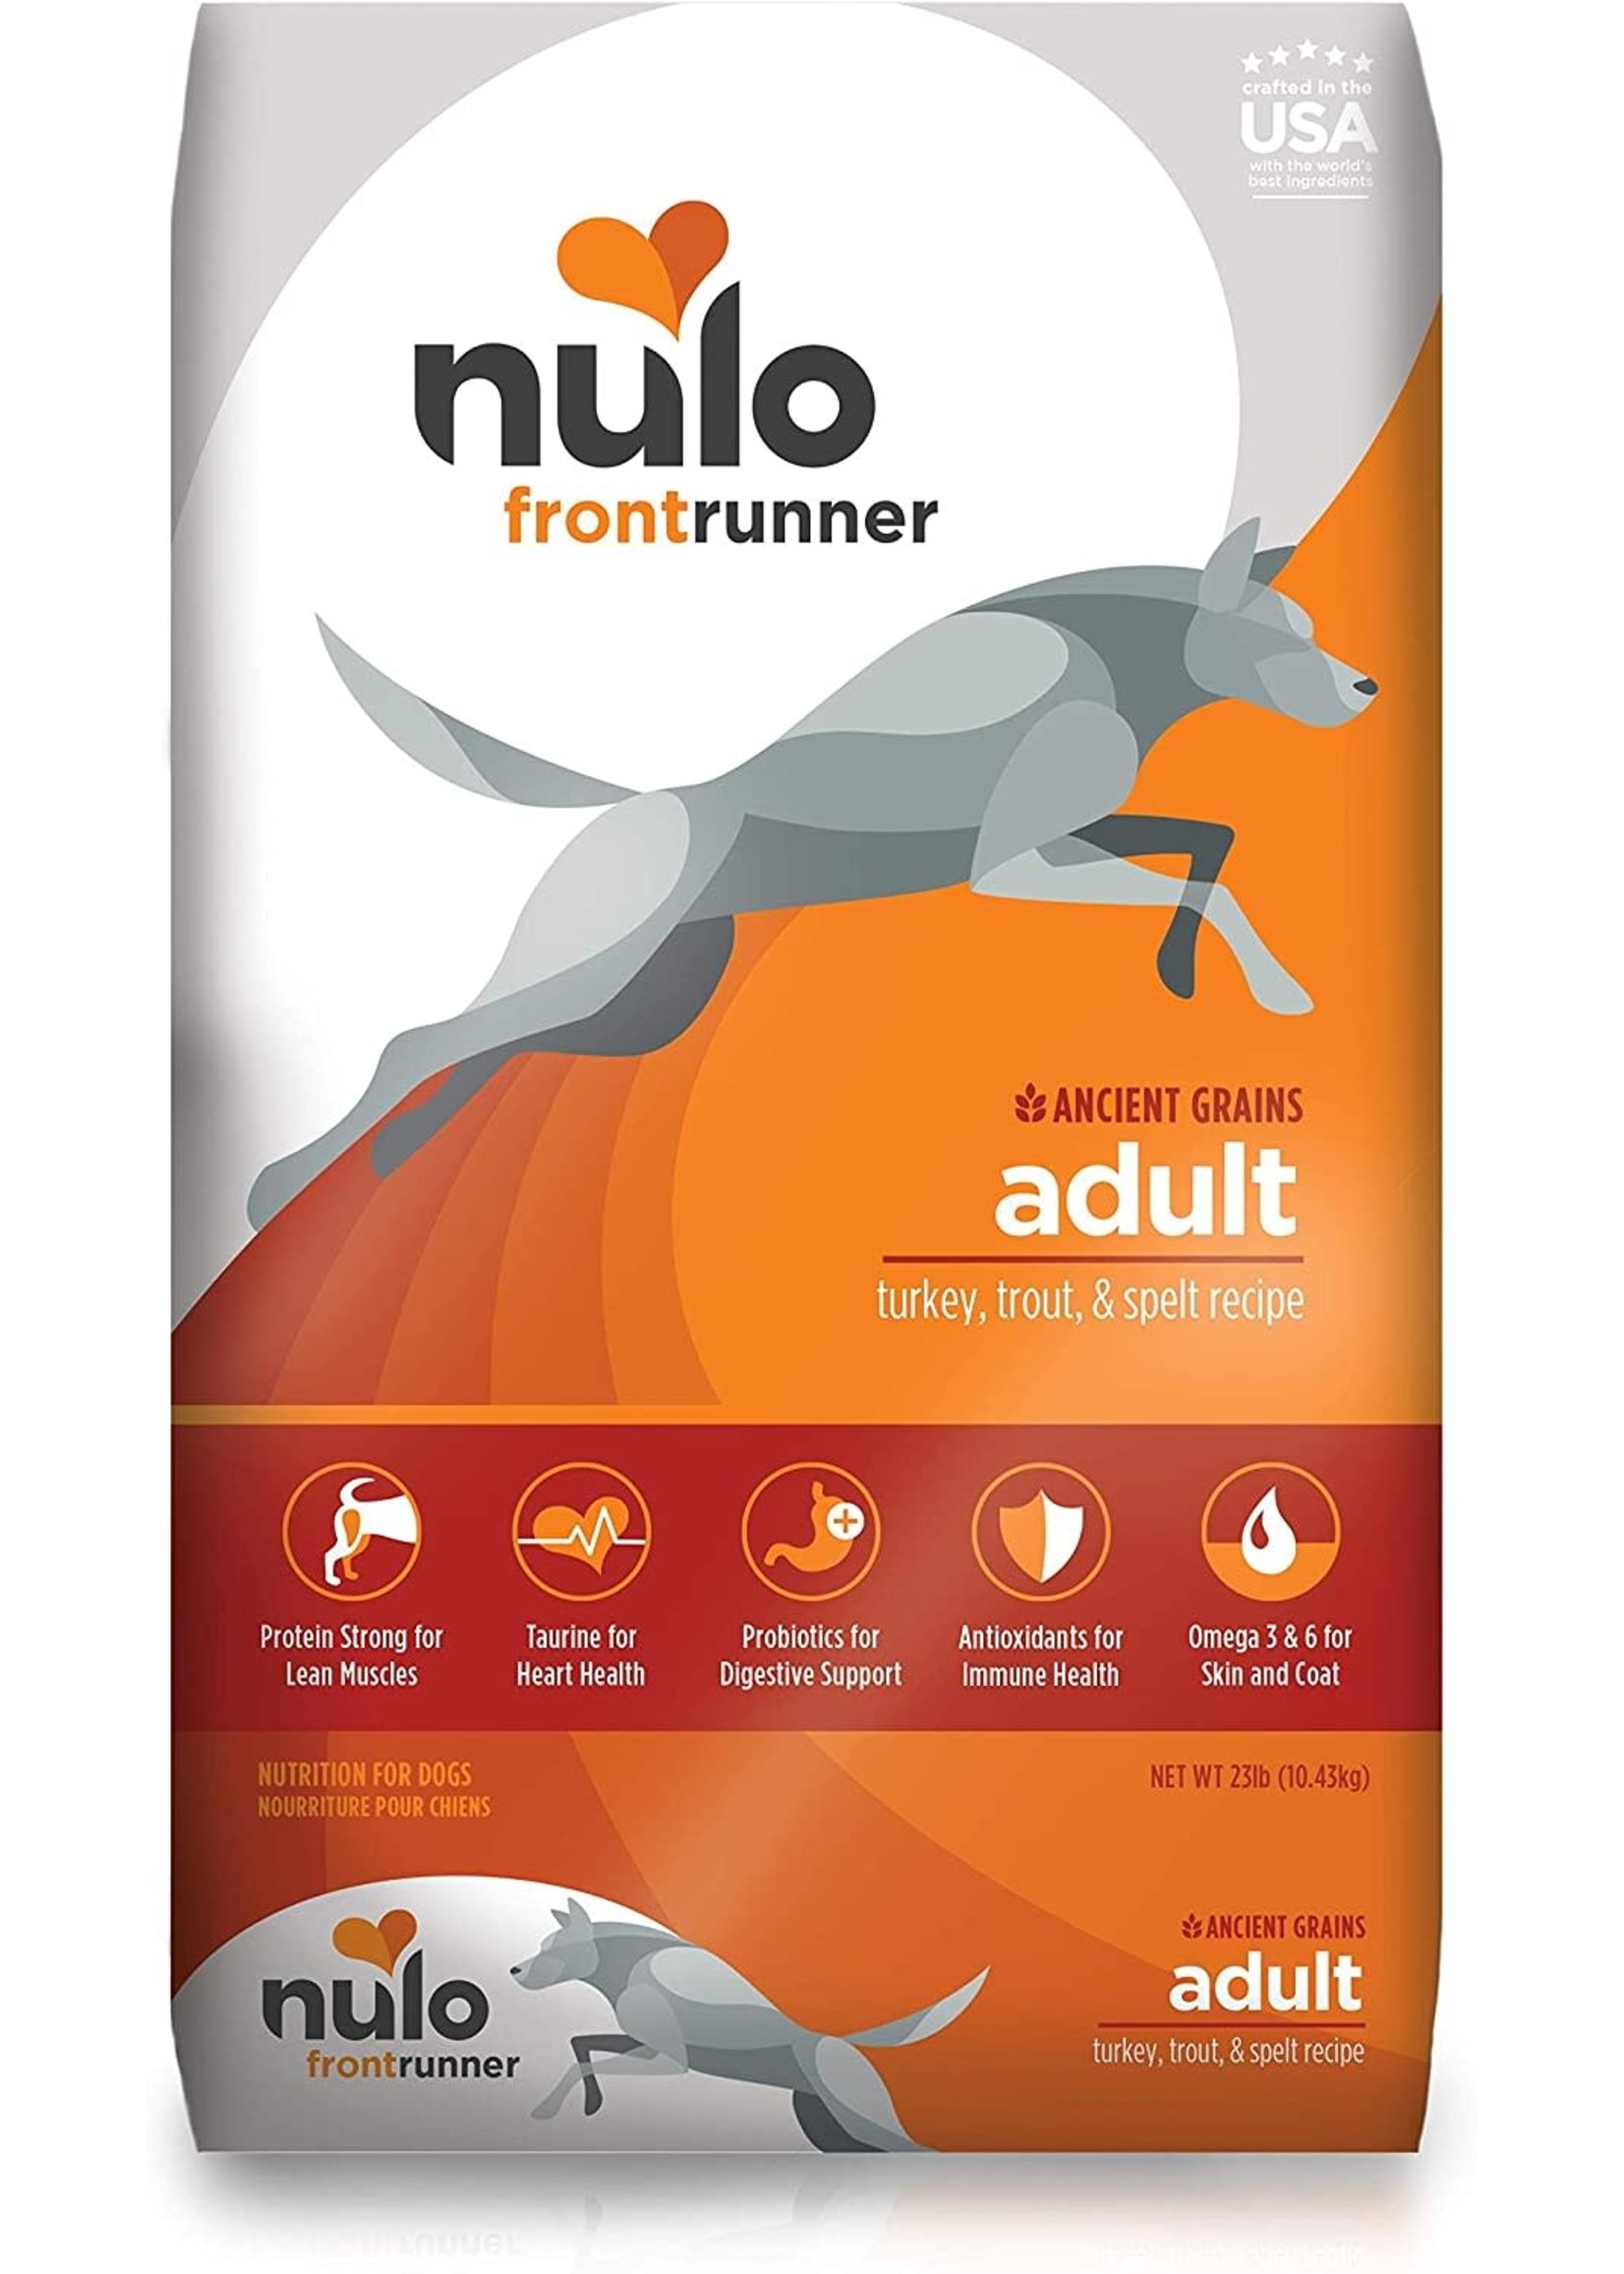 Nulo Frontrunner High-Protein Kibble Turkey Trout & Spelt Adult Dog Food 23lbs